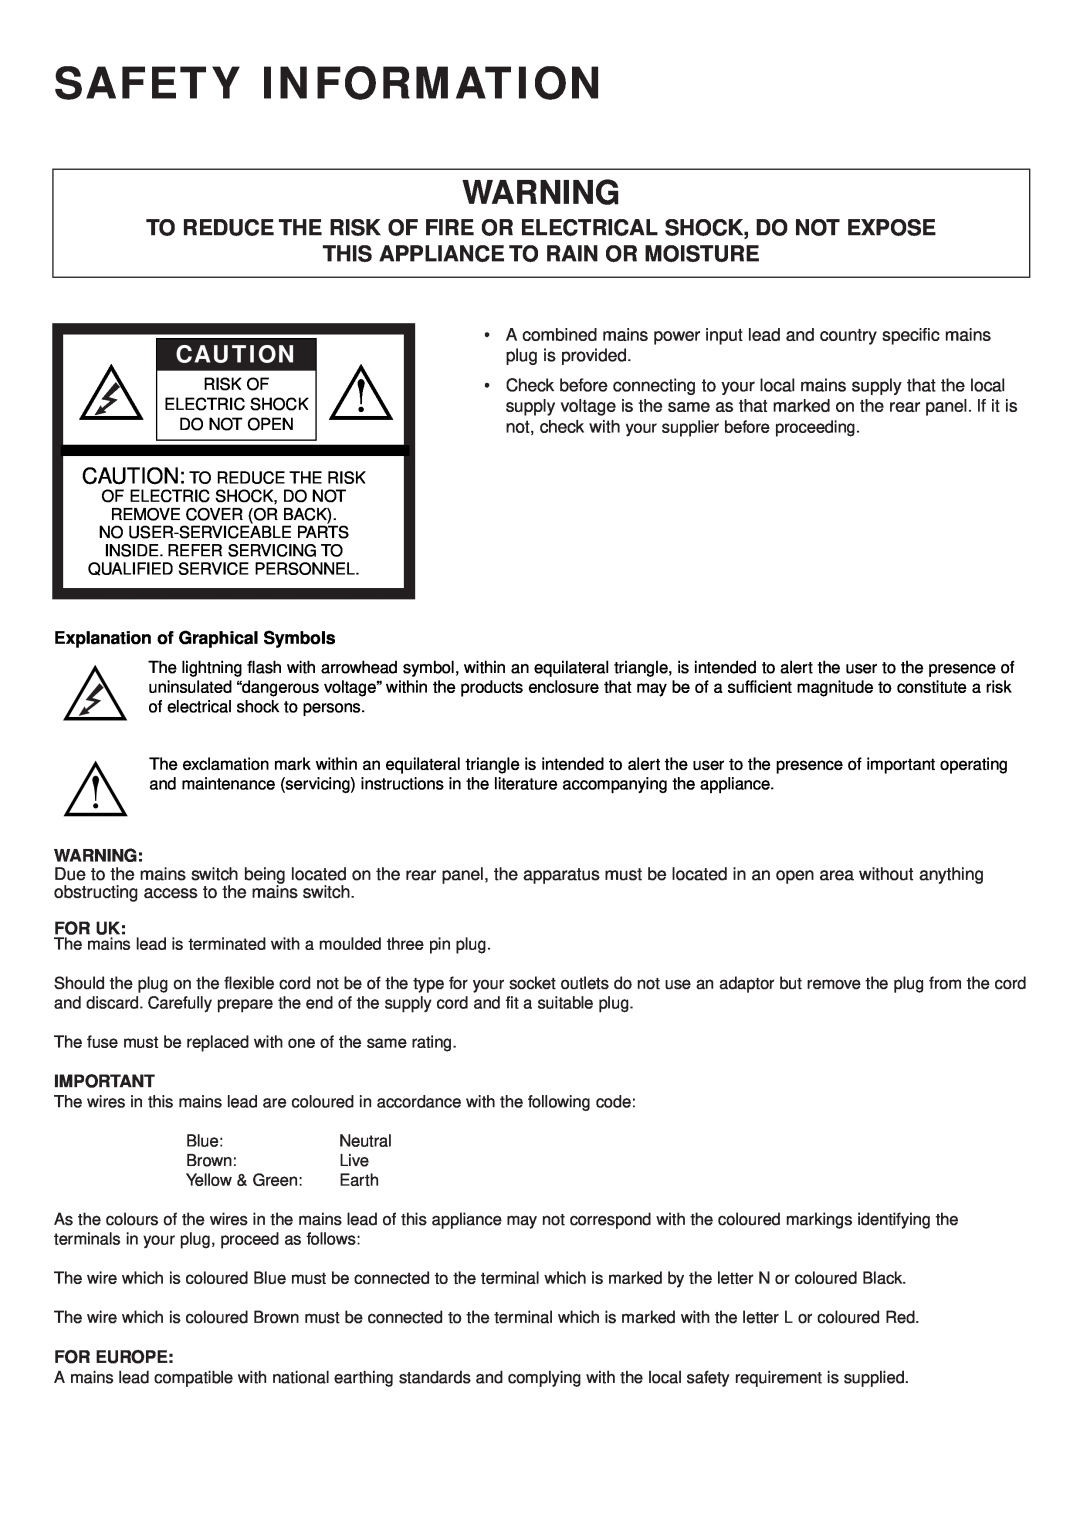 KEF Audio PSW 2500 specifications Safety Information, Explanation of Graphical Symbols, For Uk, For Europe 